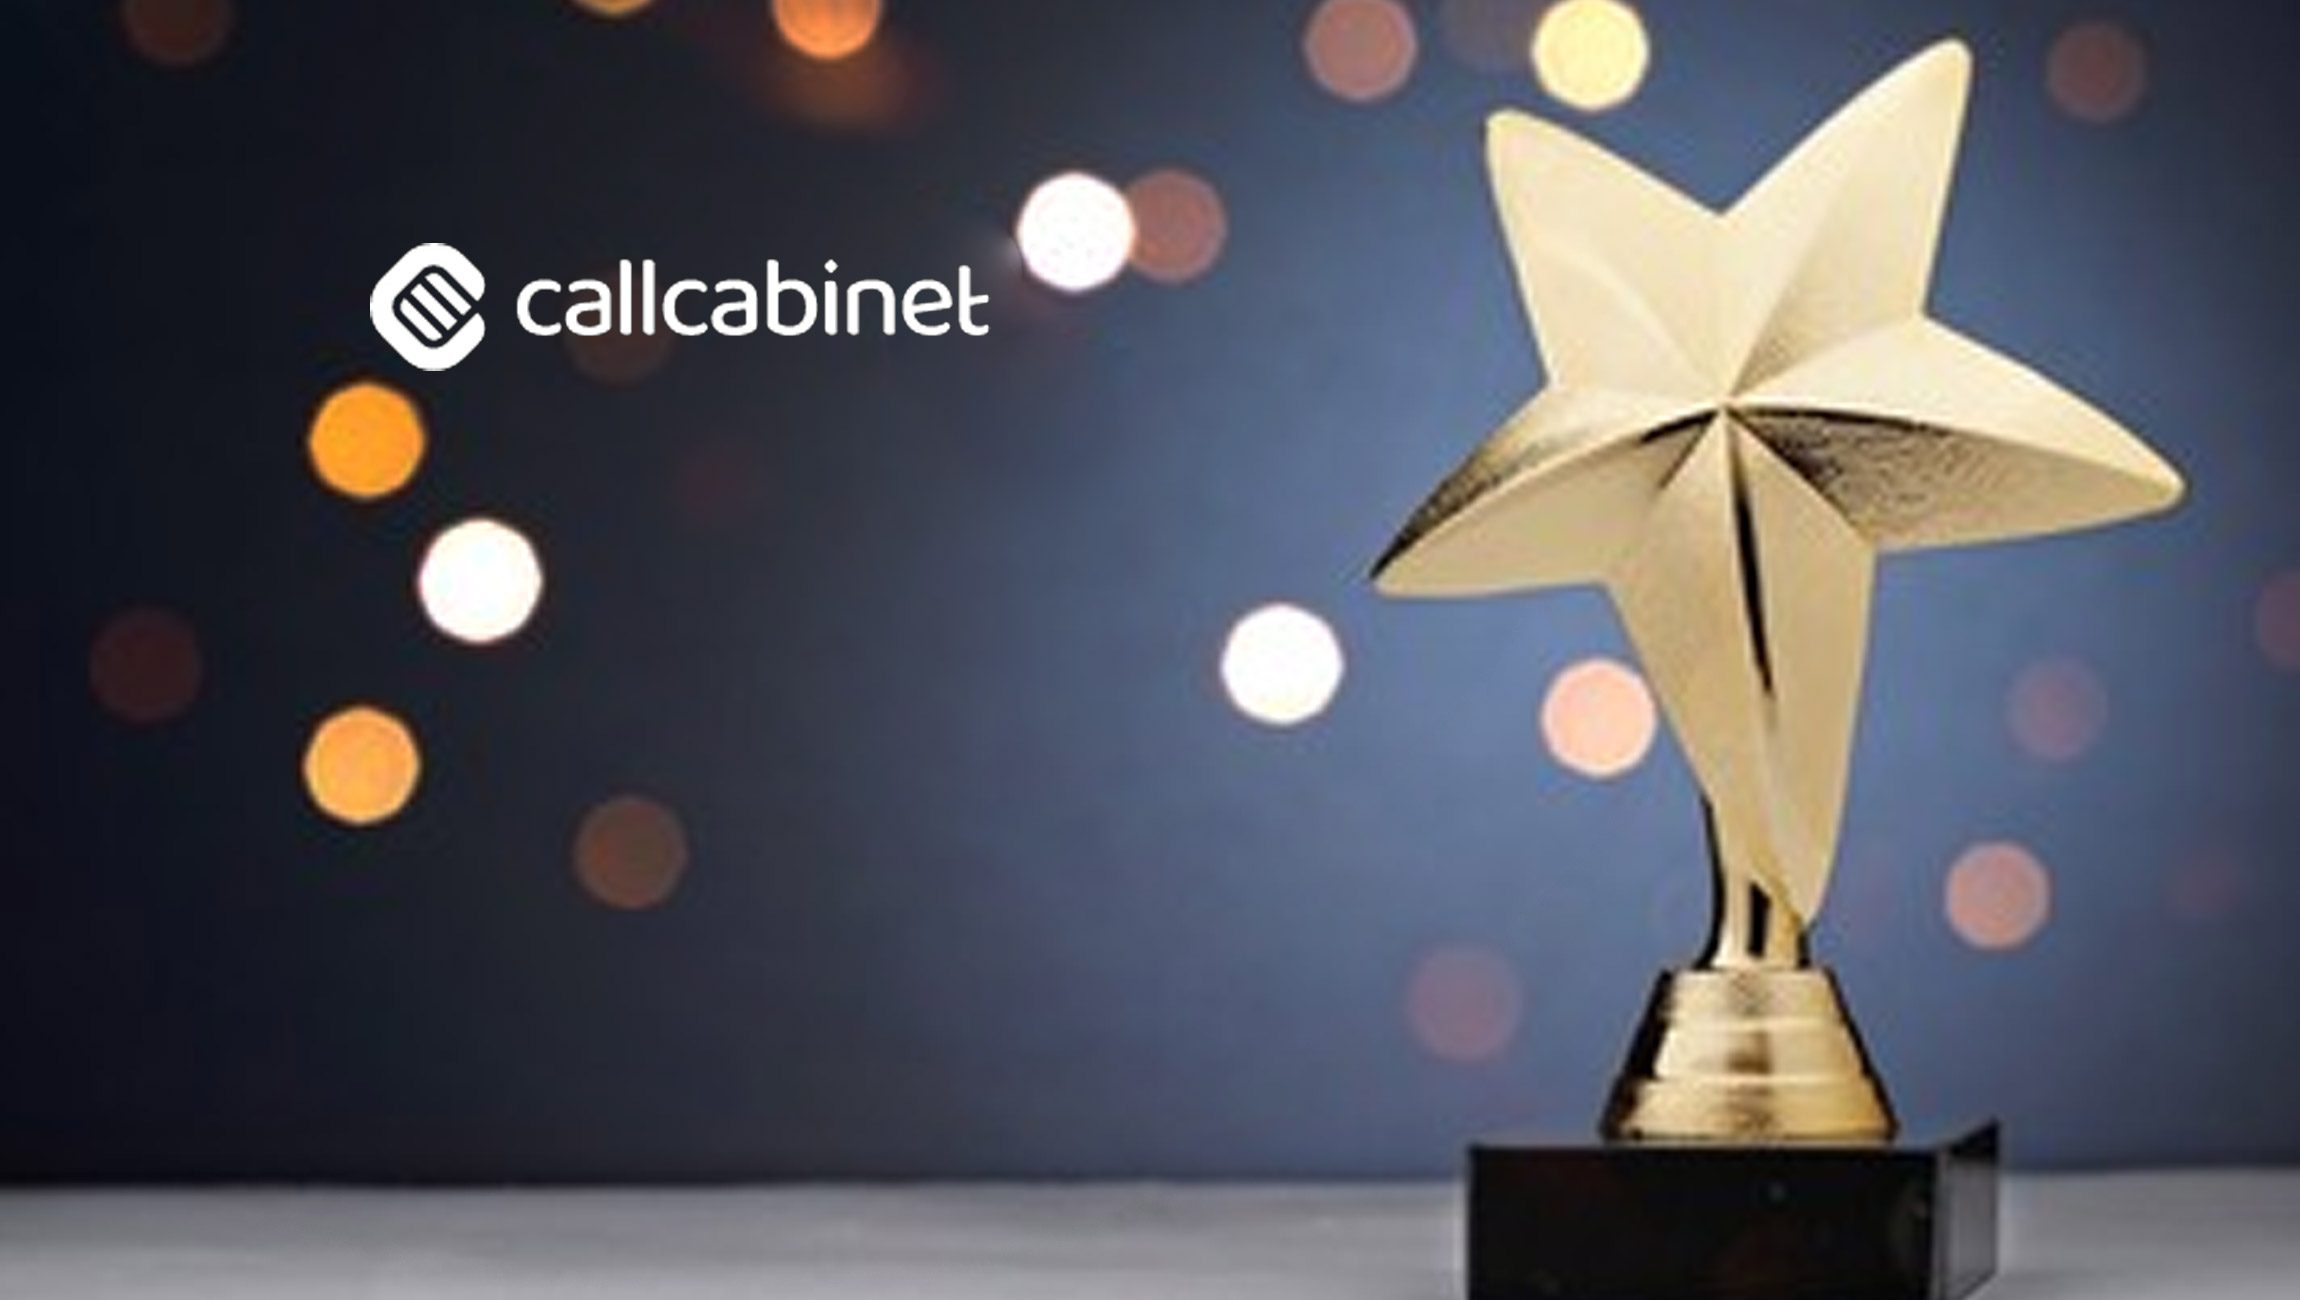 CallCabinet Awarded 2022 Communications Solutions Product of the Year